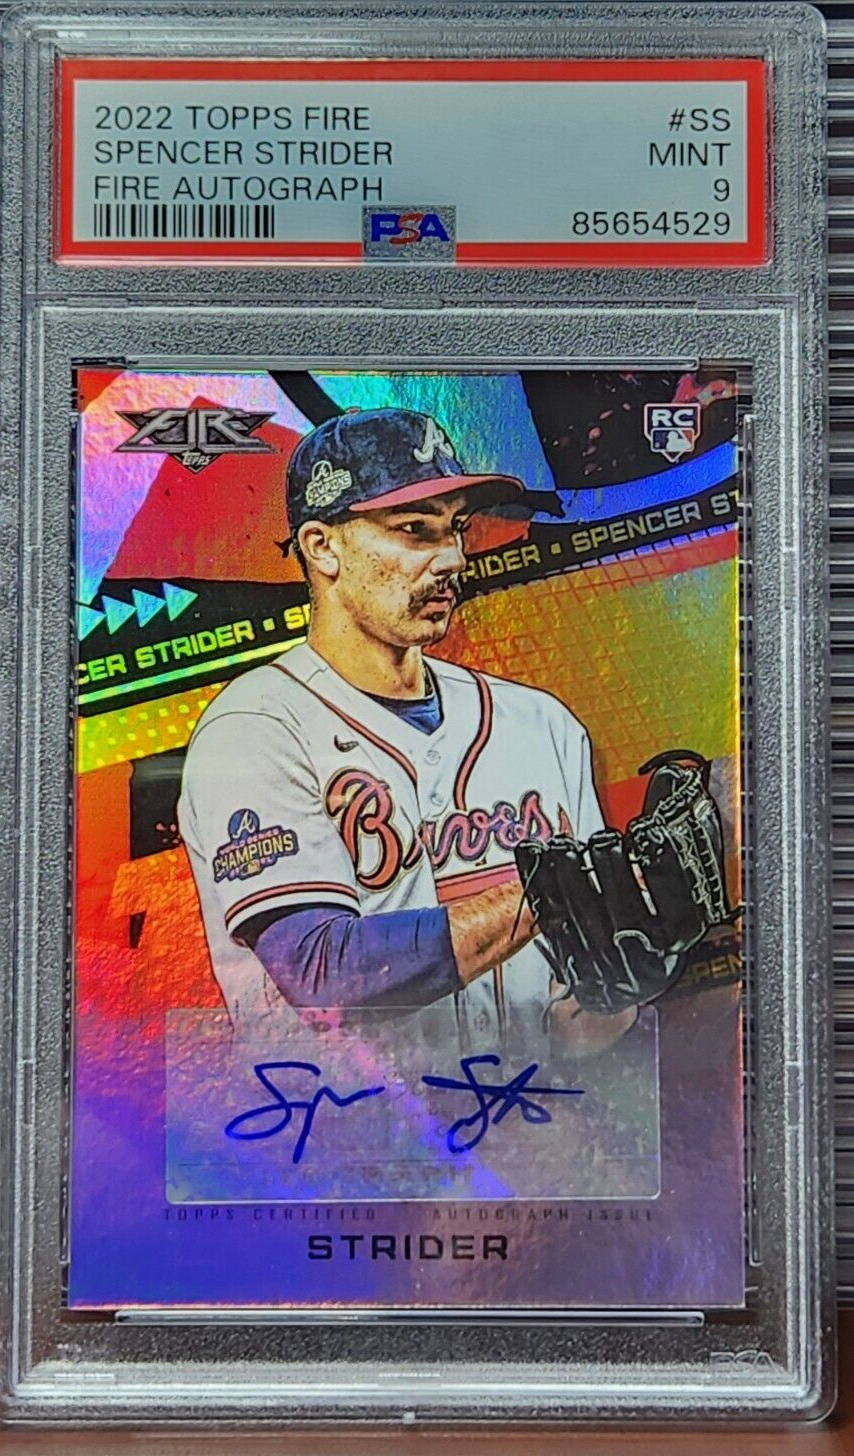 2022 Topps Fire Spencer Strider Auto PSA 9 Mint RC Rookie Braves #SS